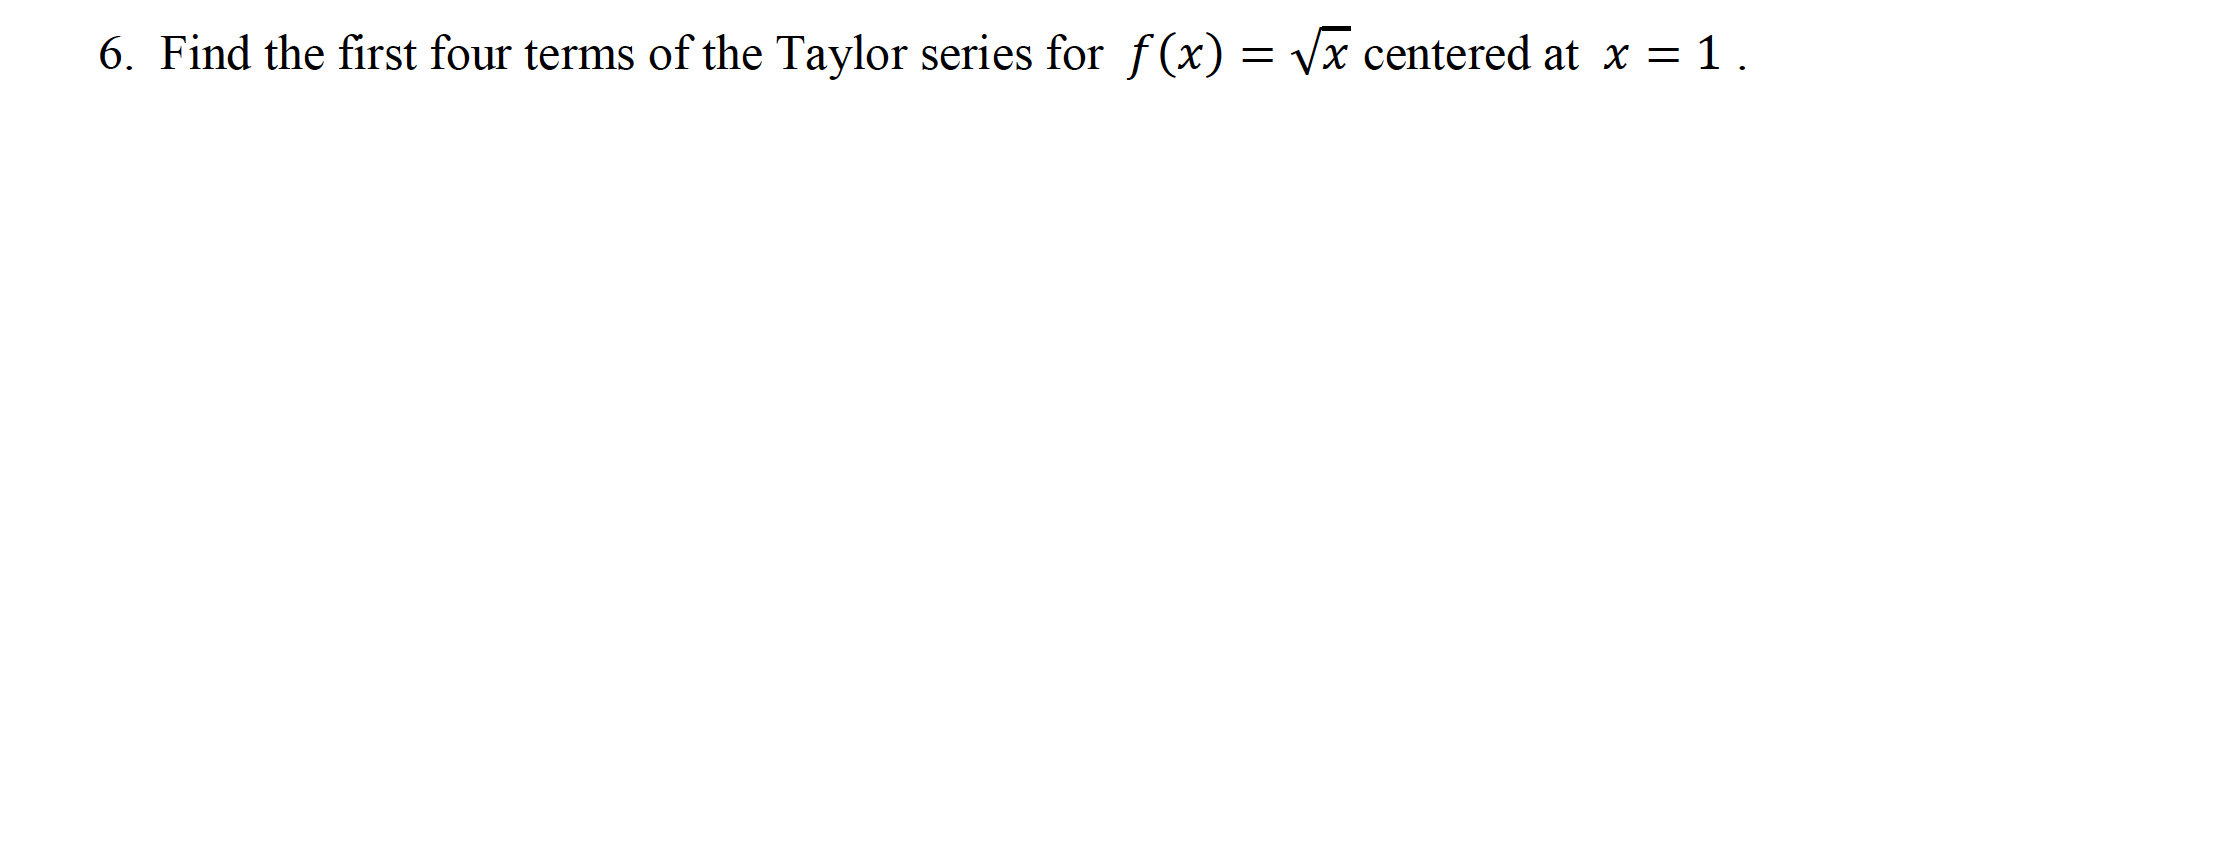 6. Find the first four terms of the Taylor series for f(x) = Vx centered at x = 1.
